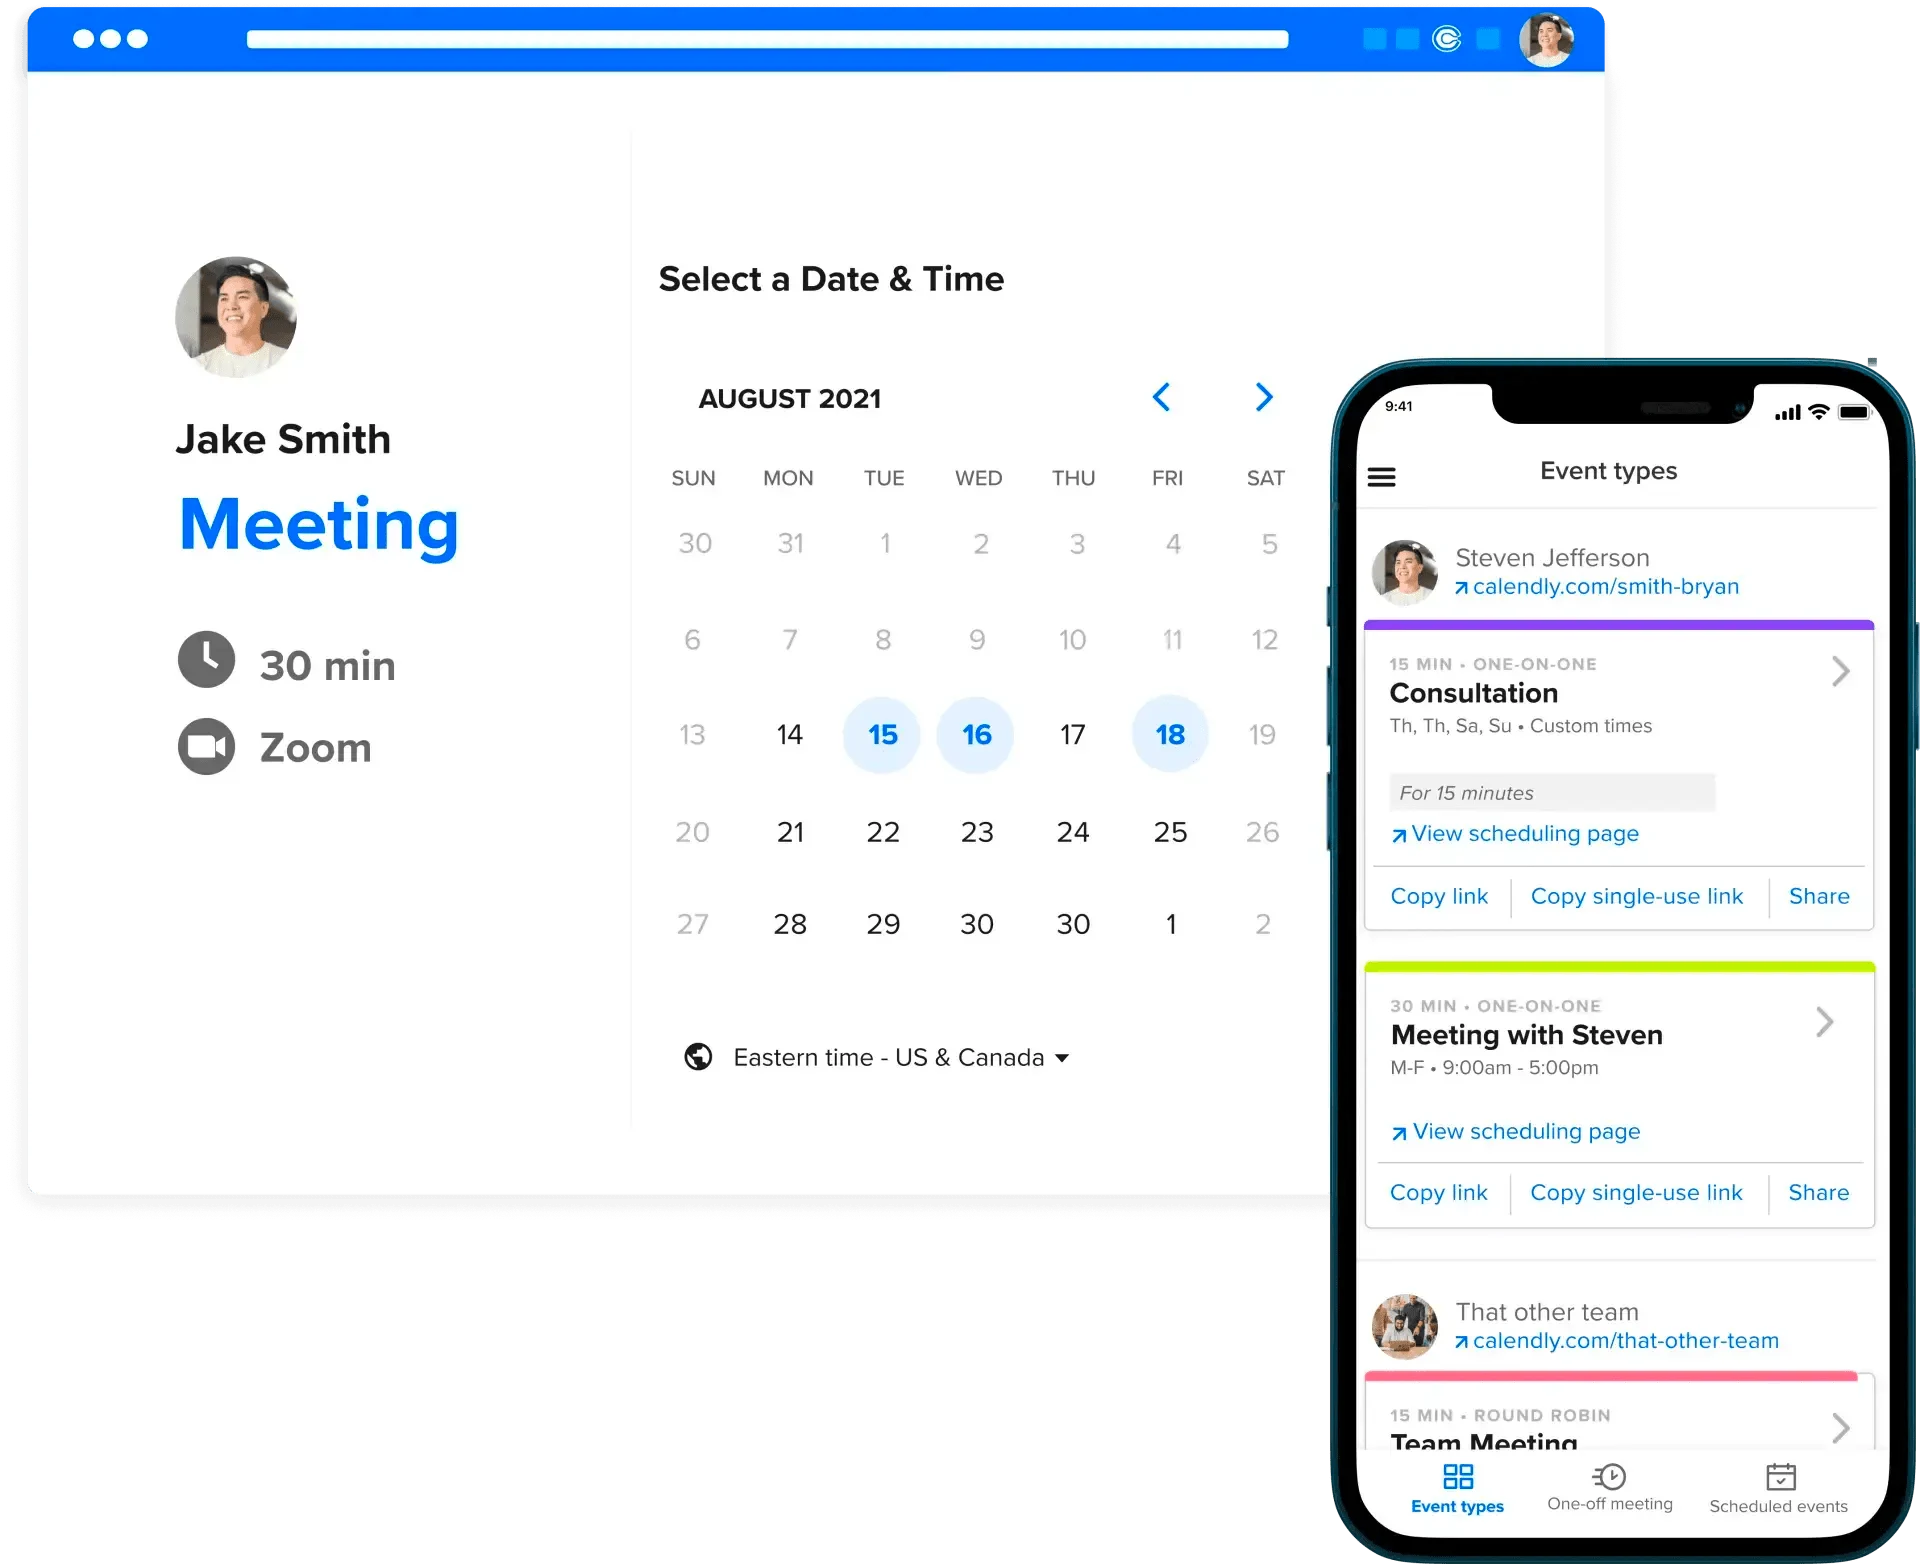 Two Calendly screenshots. The first is the screen to "Select a Date and Time" for a meeting on desktop. The second shows the "Event types" screen on the mobile app, including events called "Consultation", "Meeting with Steven", and "Team Meeting"